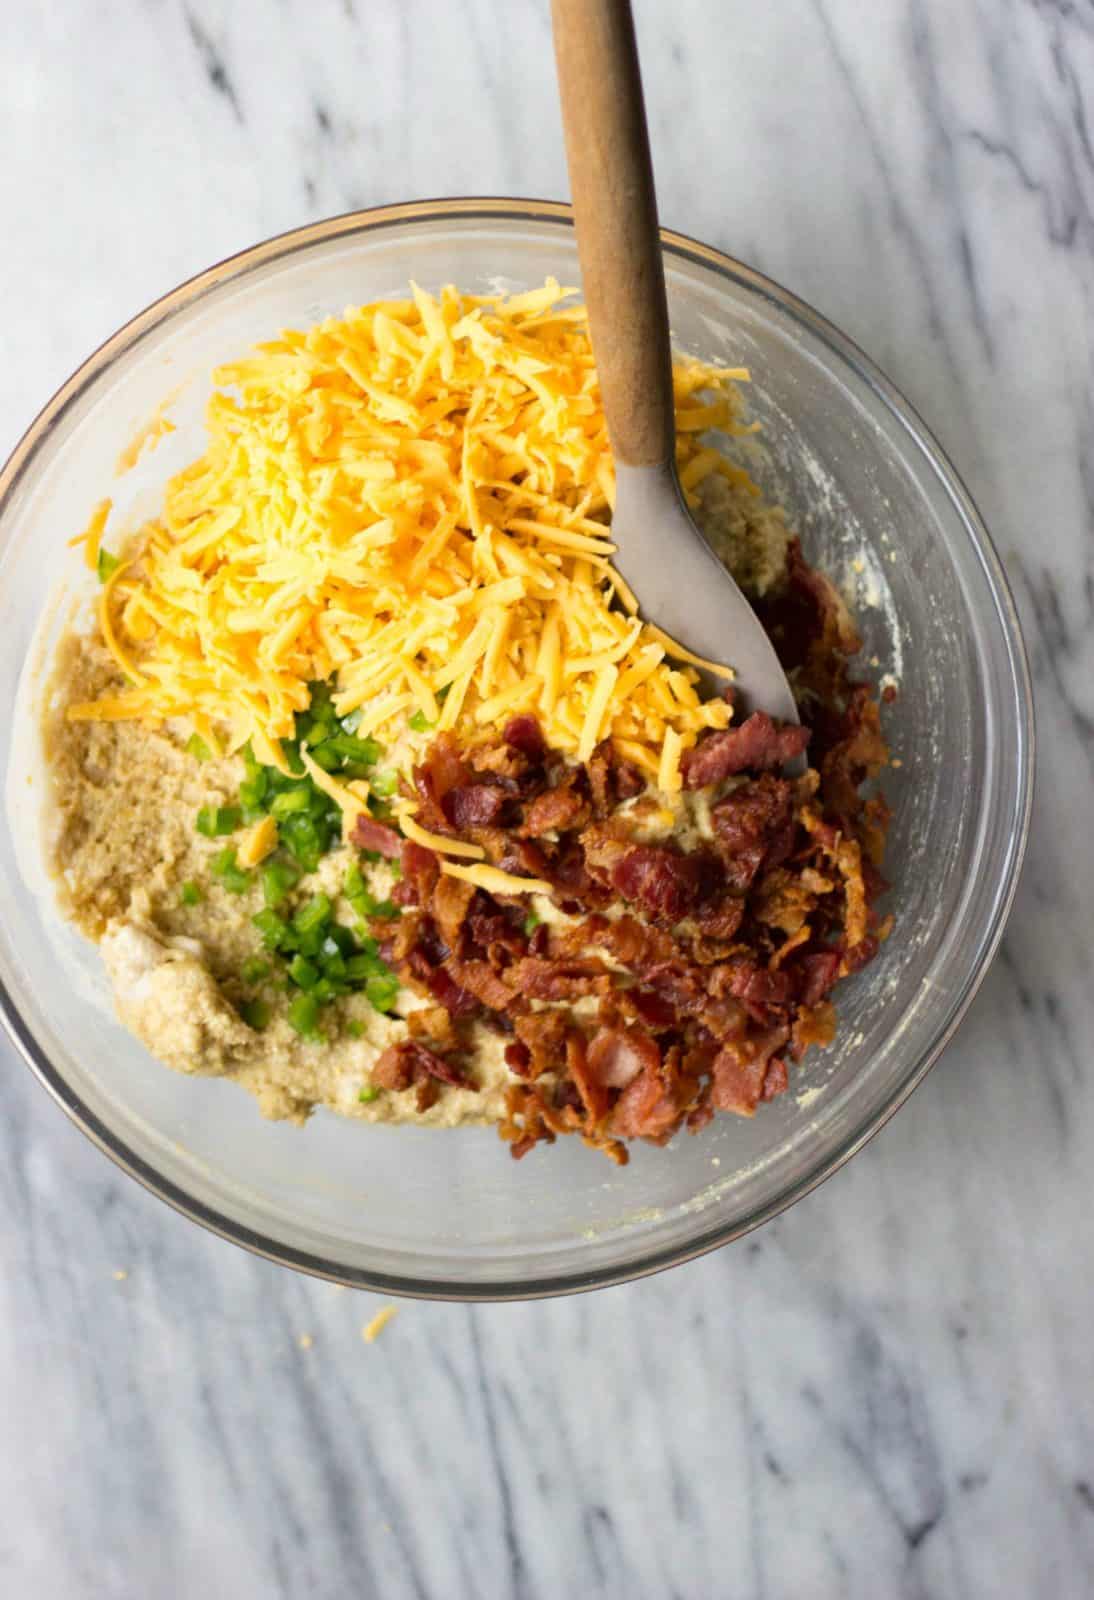 Cornbread muffin batter with cheddar, bacon and jalapeno in a bowl.